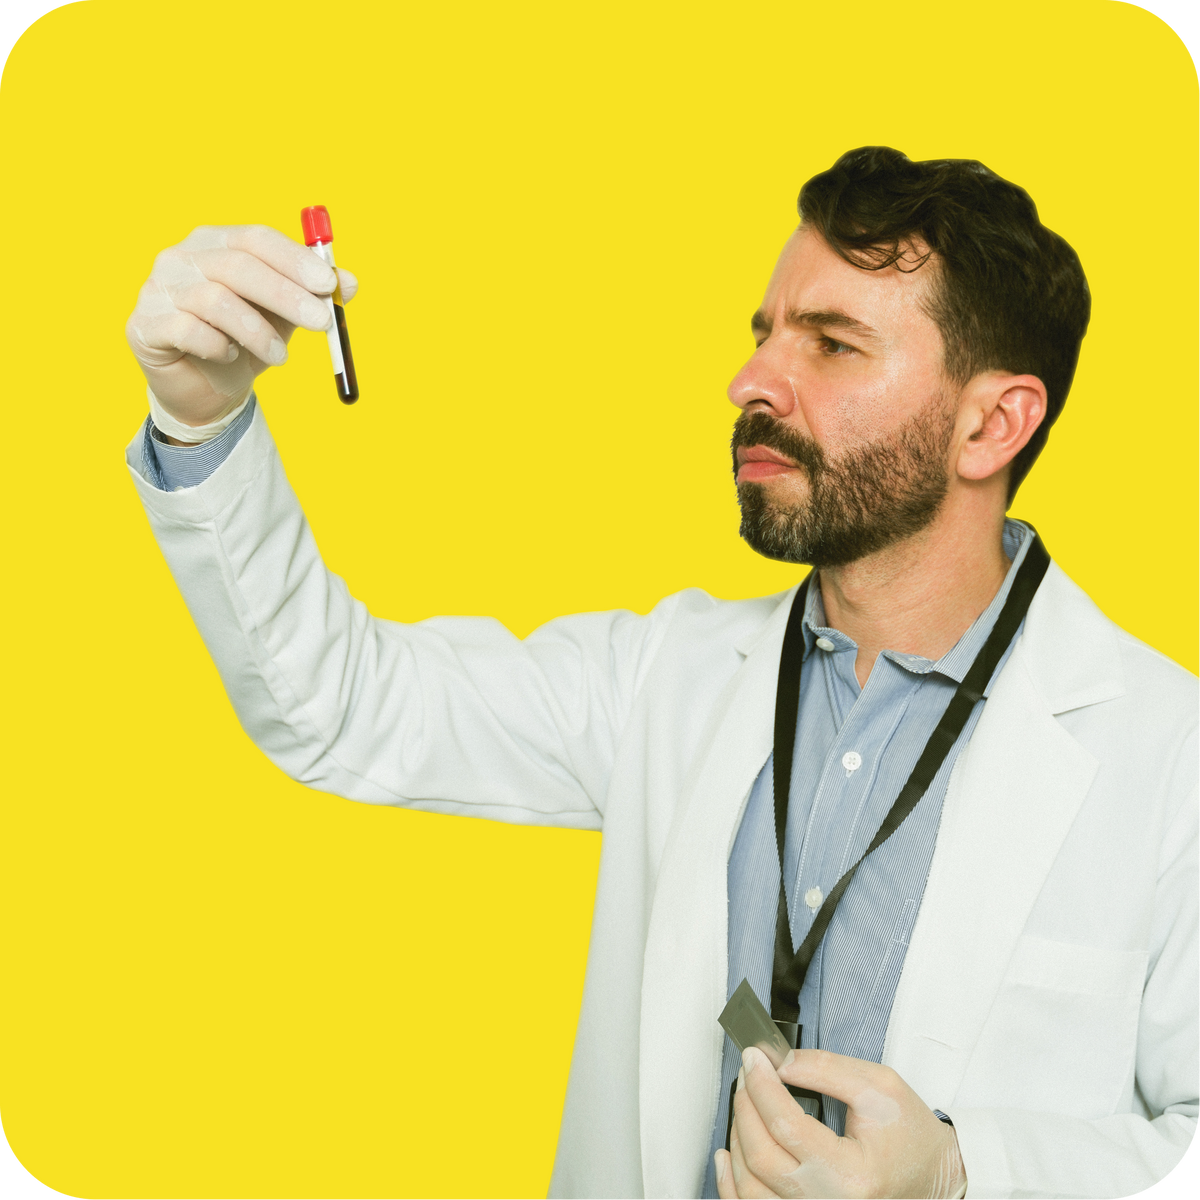 A man in a lab coat inspecting a vial of blood on a yellow background.